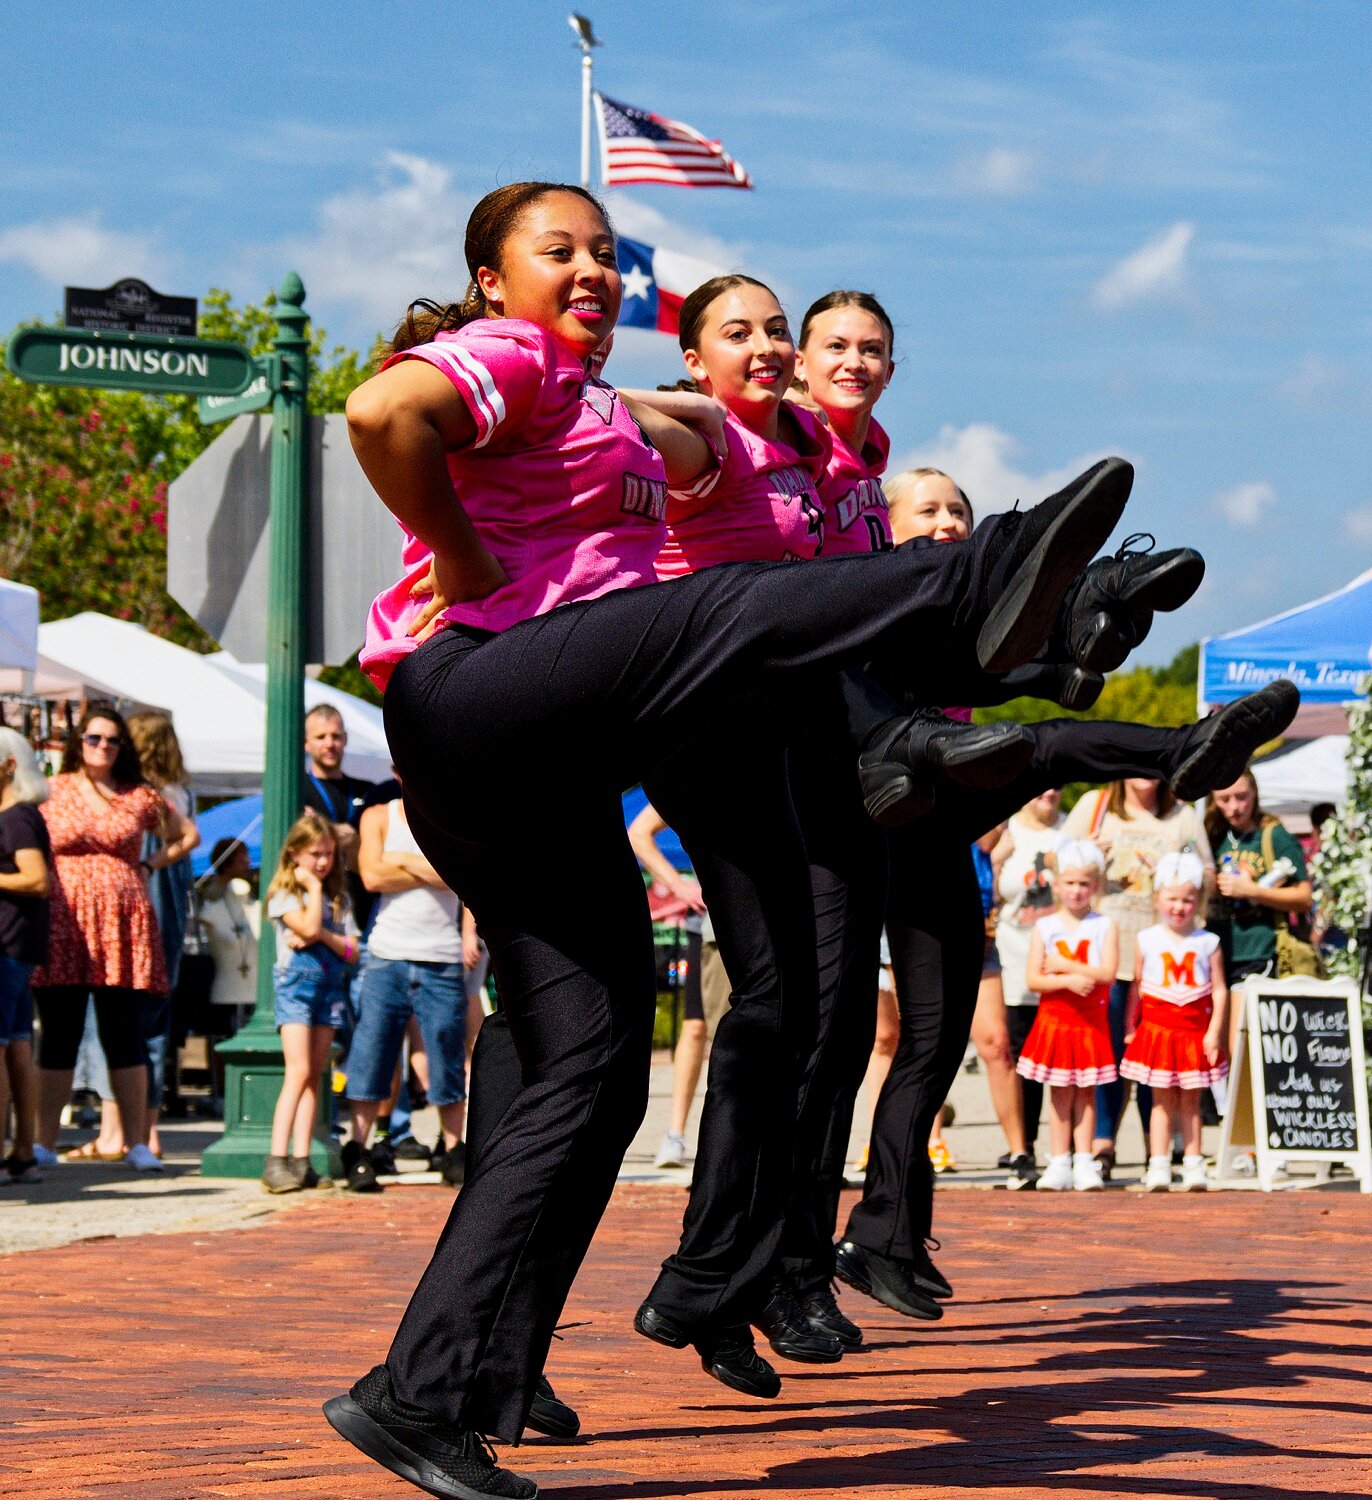 Dance Dimensions' team of Rhythm Elite shows off their high-kicks in line. [additional iron horse images available]